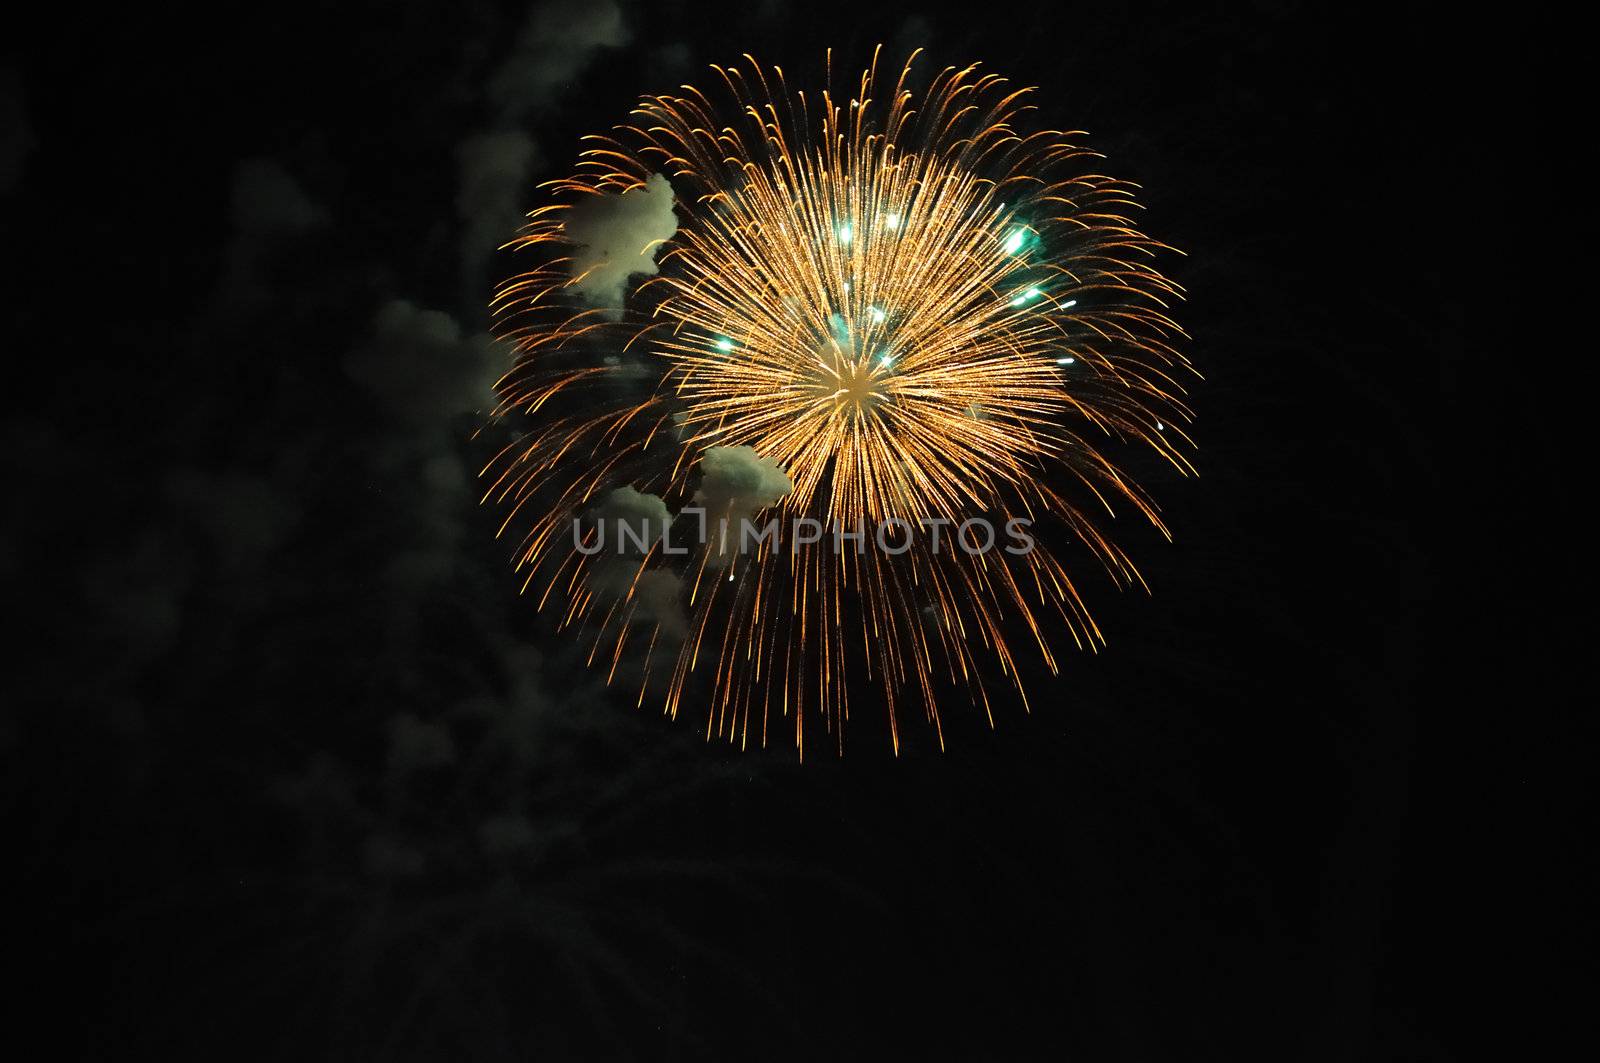 Celebration with fire works on the night sky